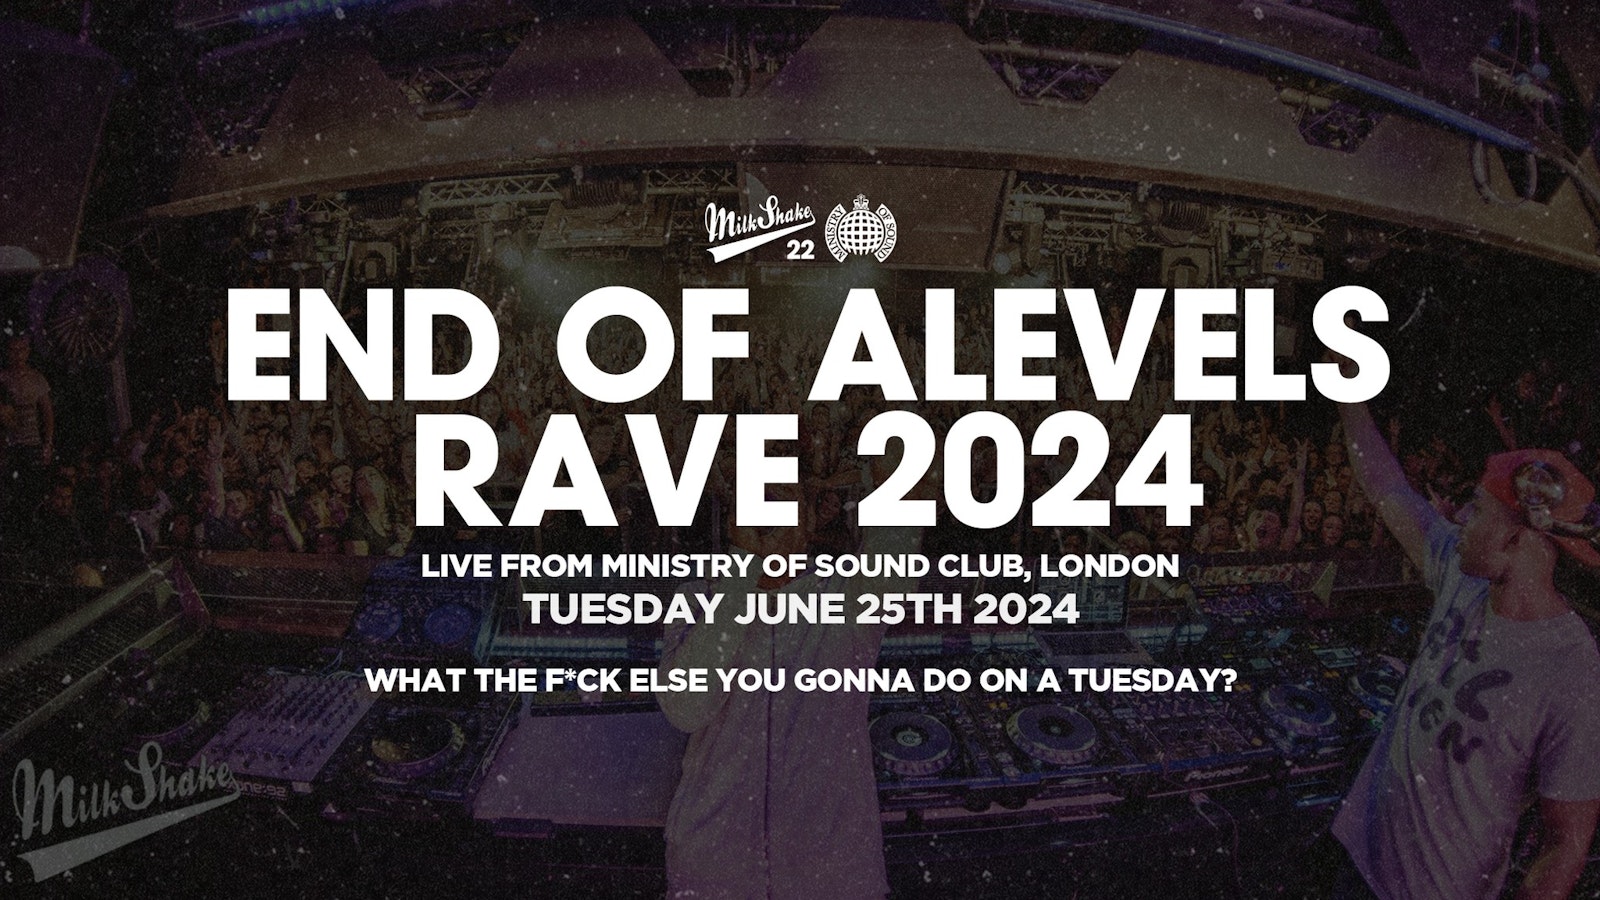 Milkshake, Ministry of Sound | End Of A-Levels Rave 2024 🔥 June 25th  ⚠️ BOOK NOW ⚠️